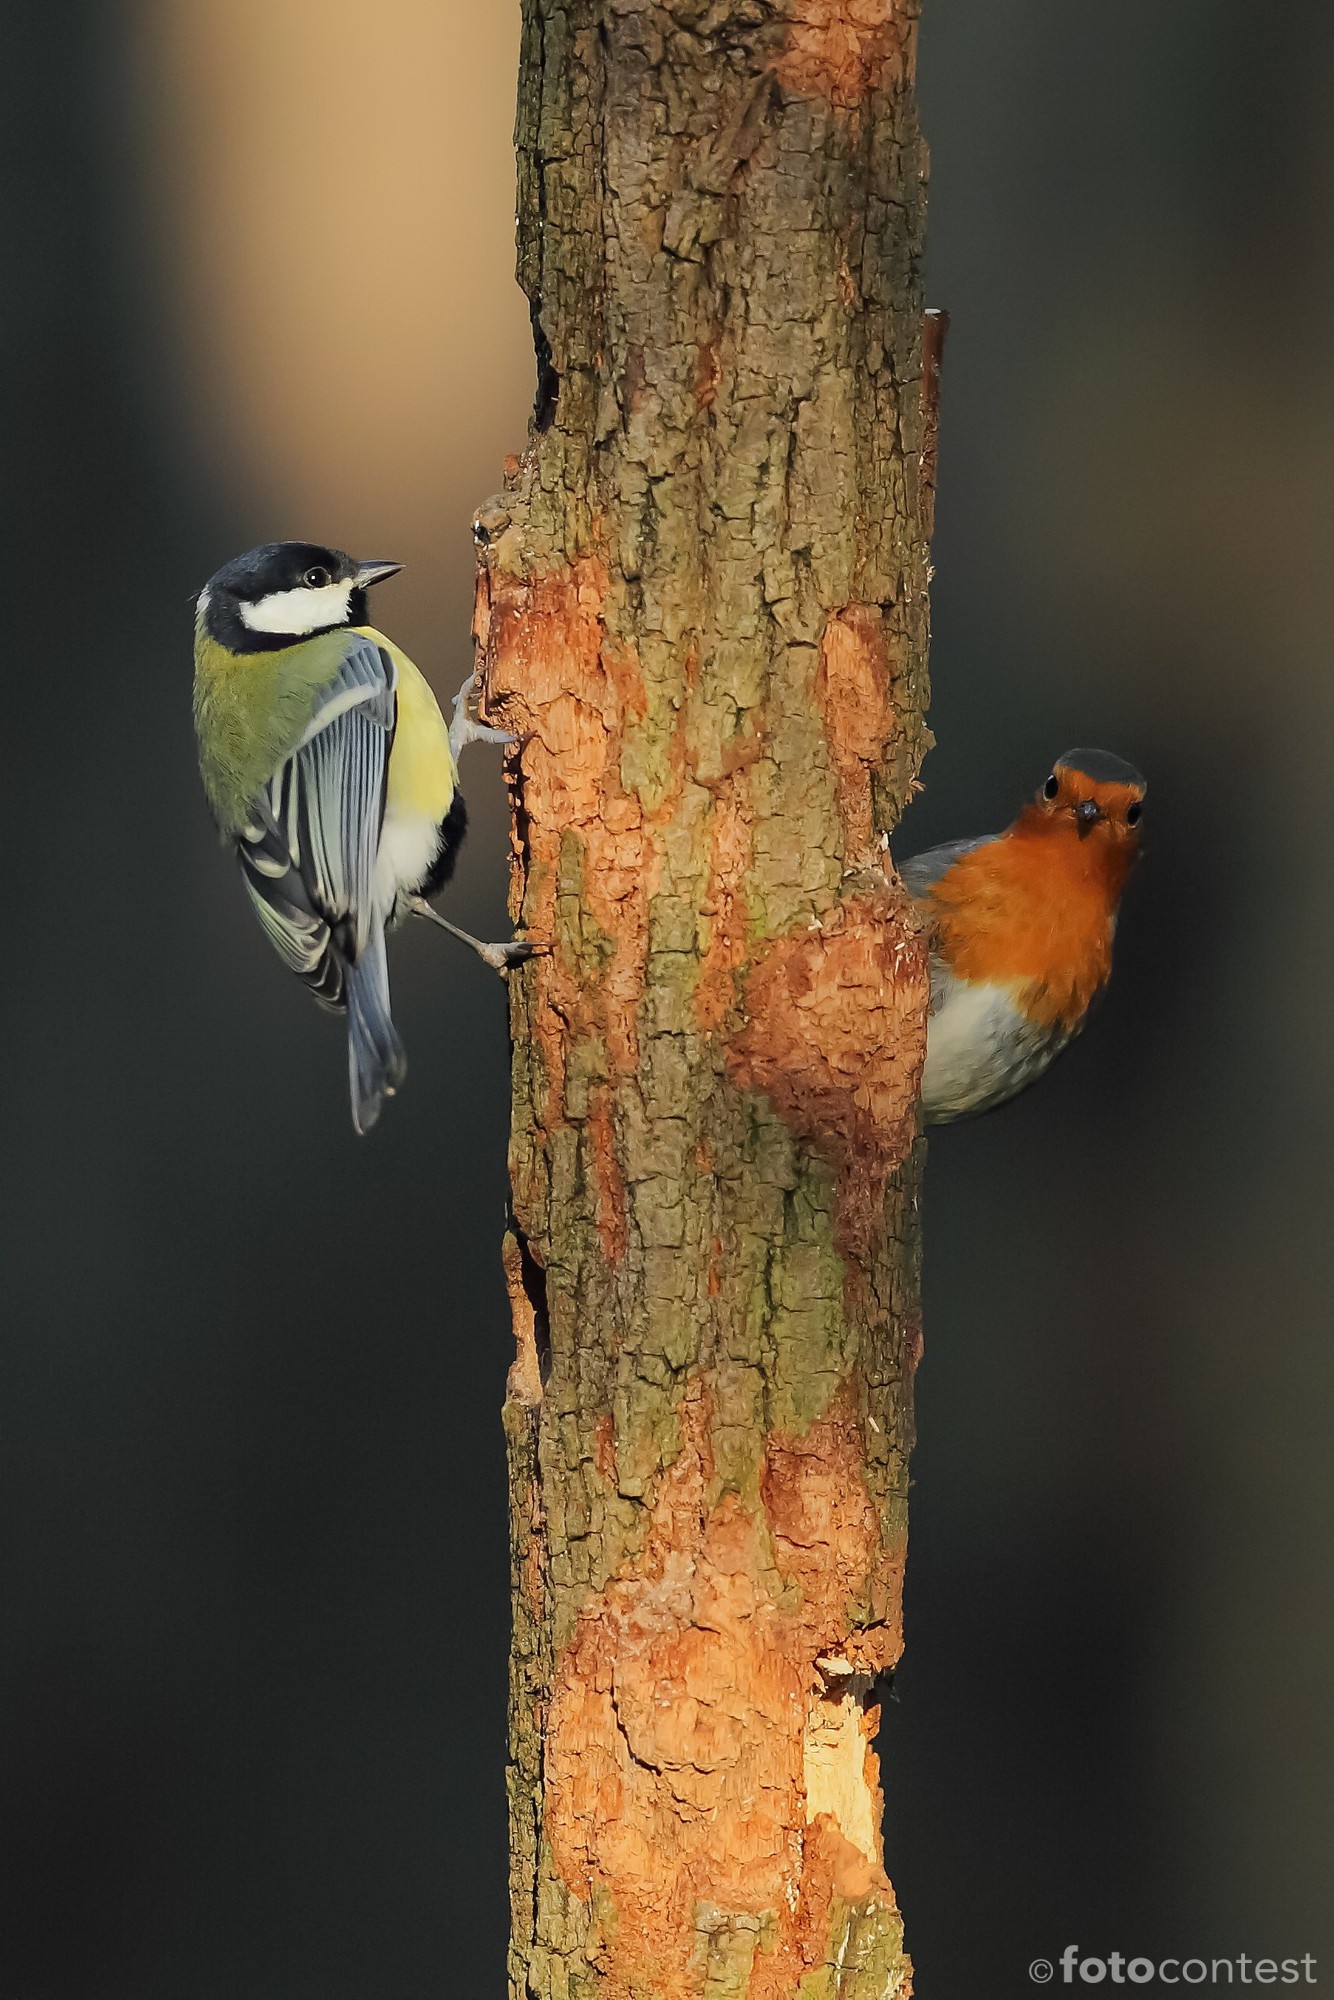 Tit and robin...